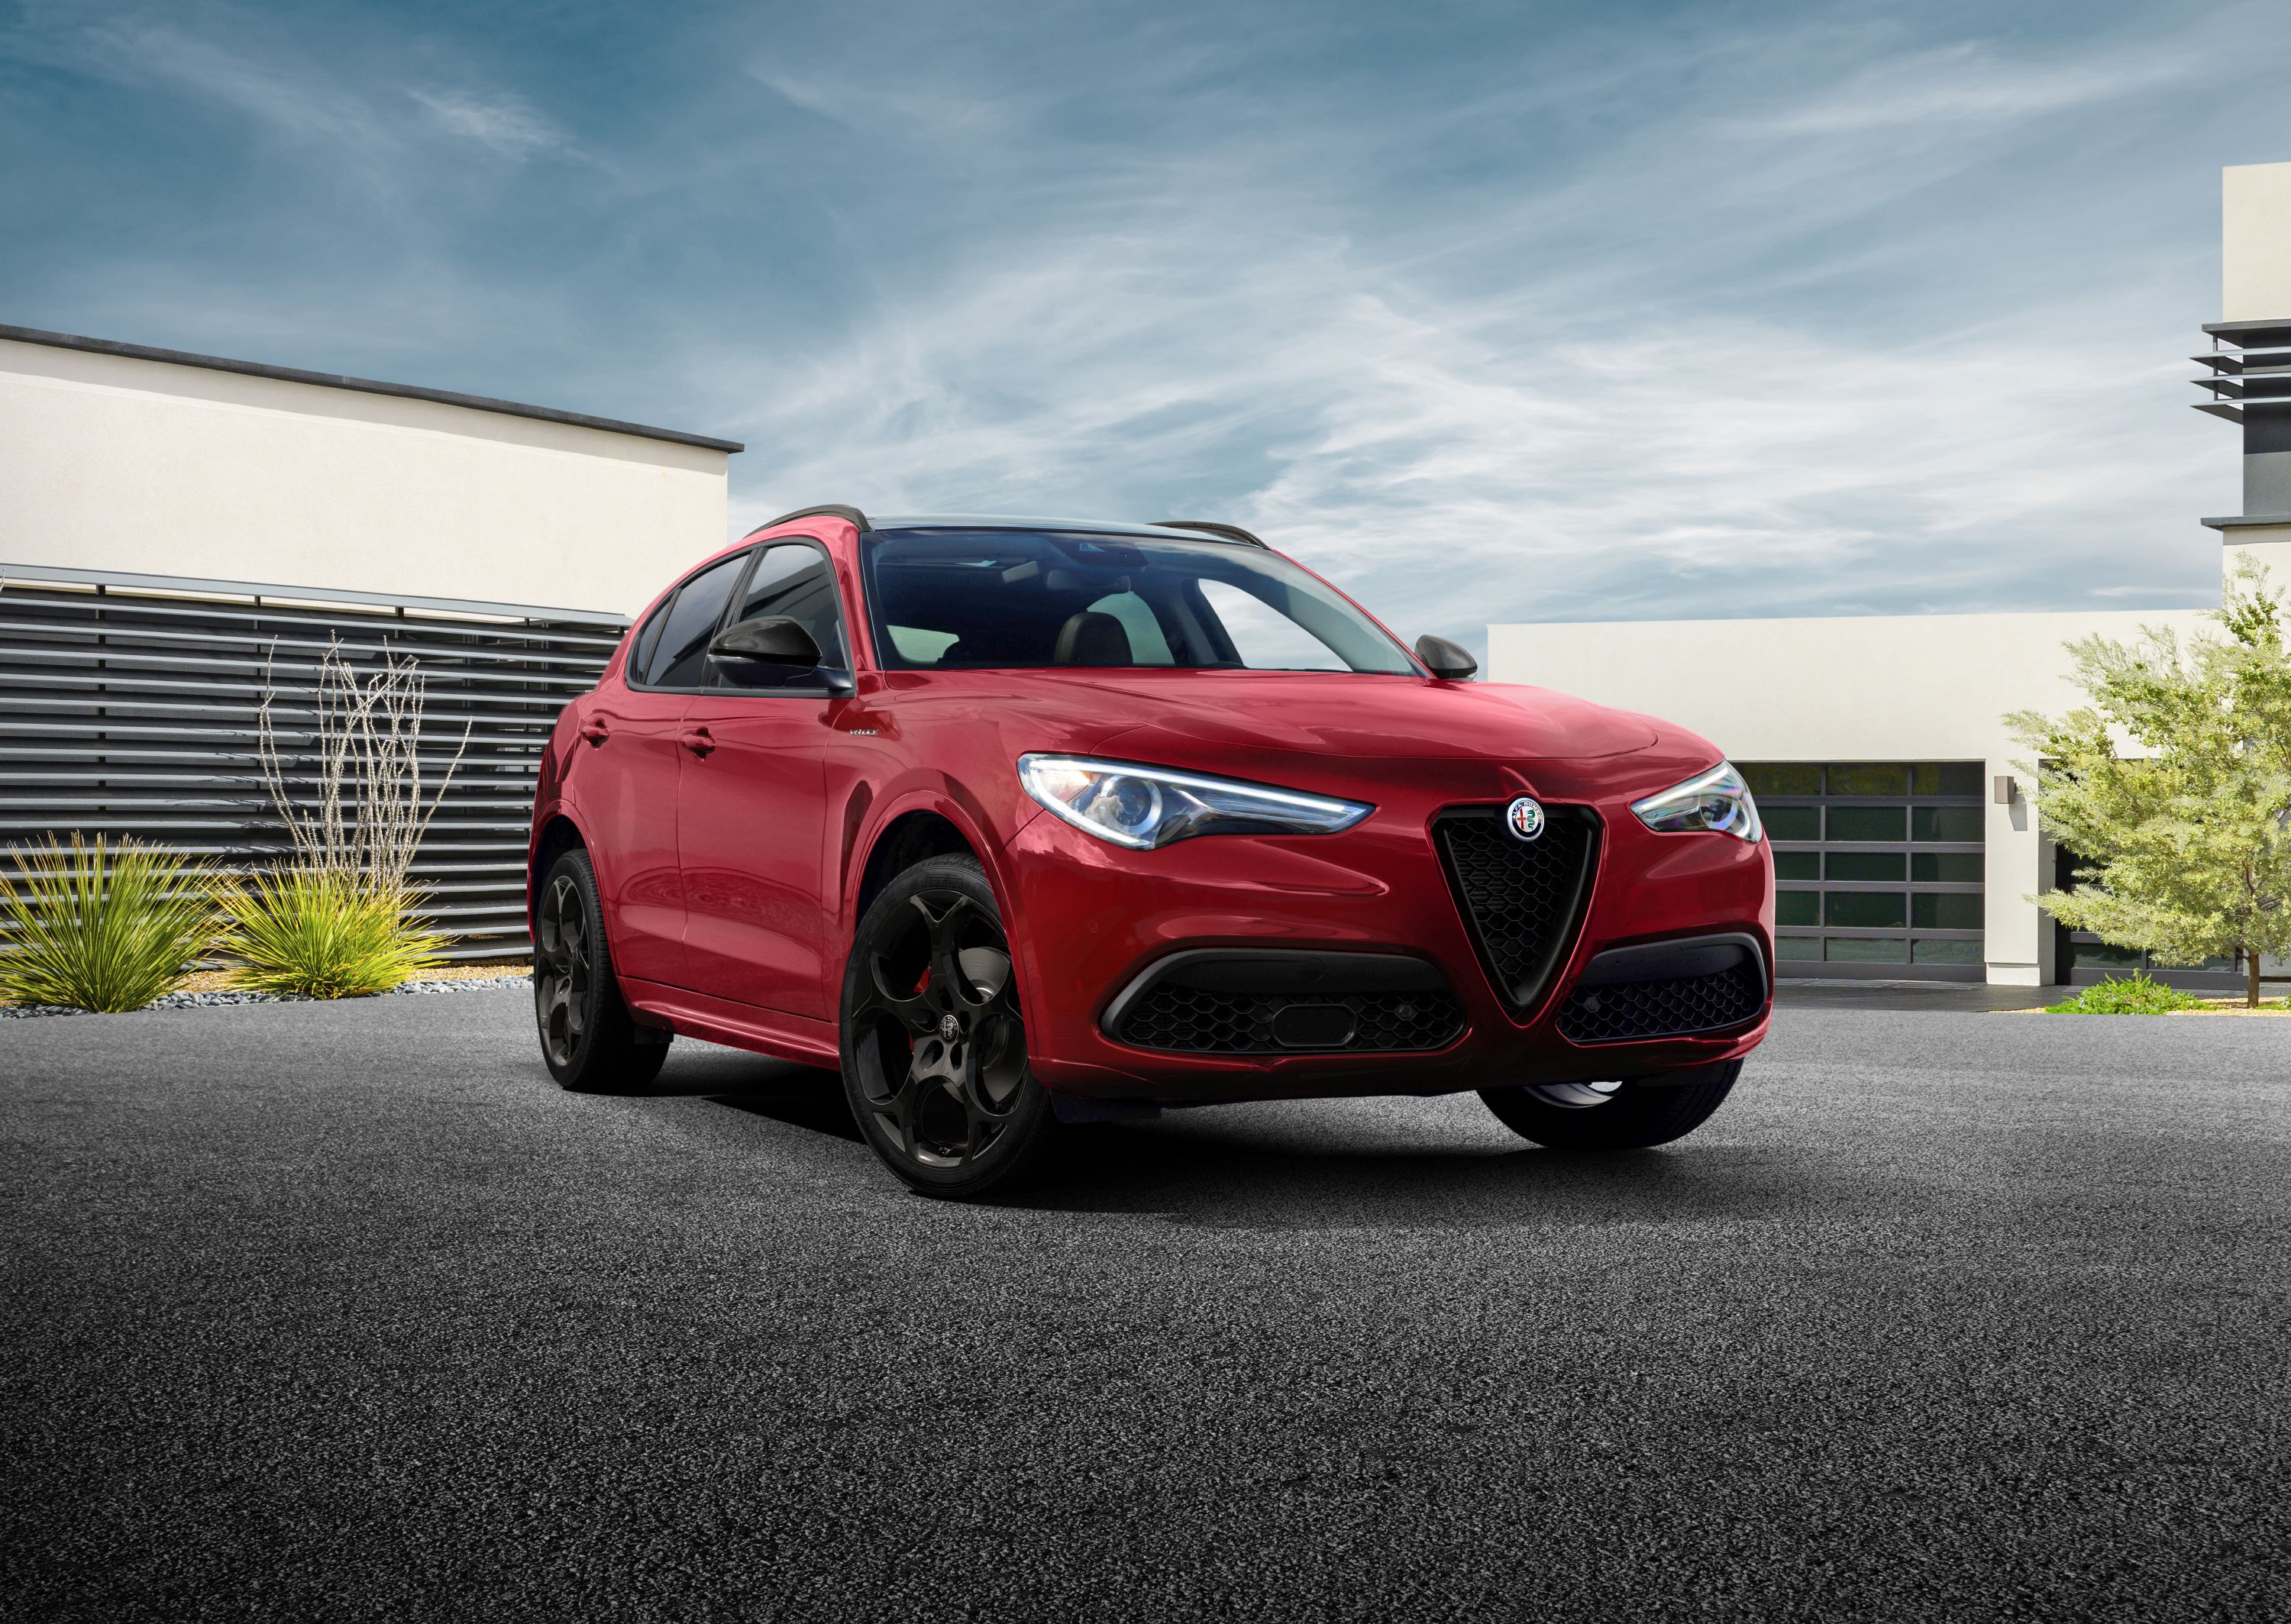 Changes to the 2022 Alfa Romeo Models